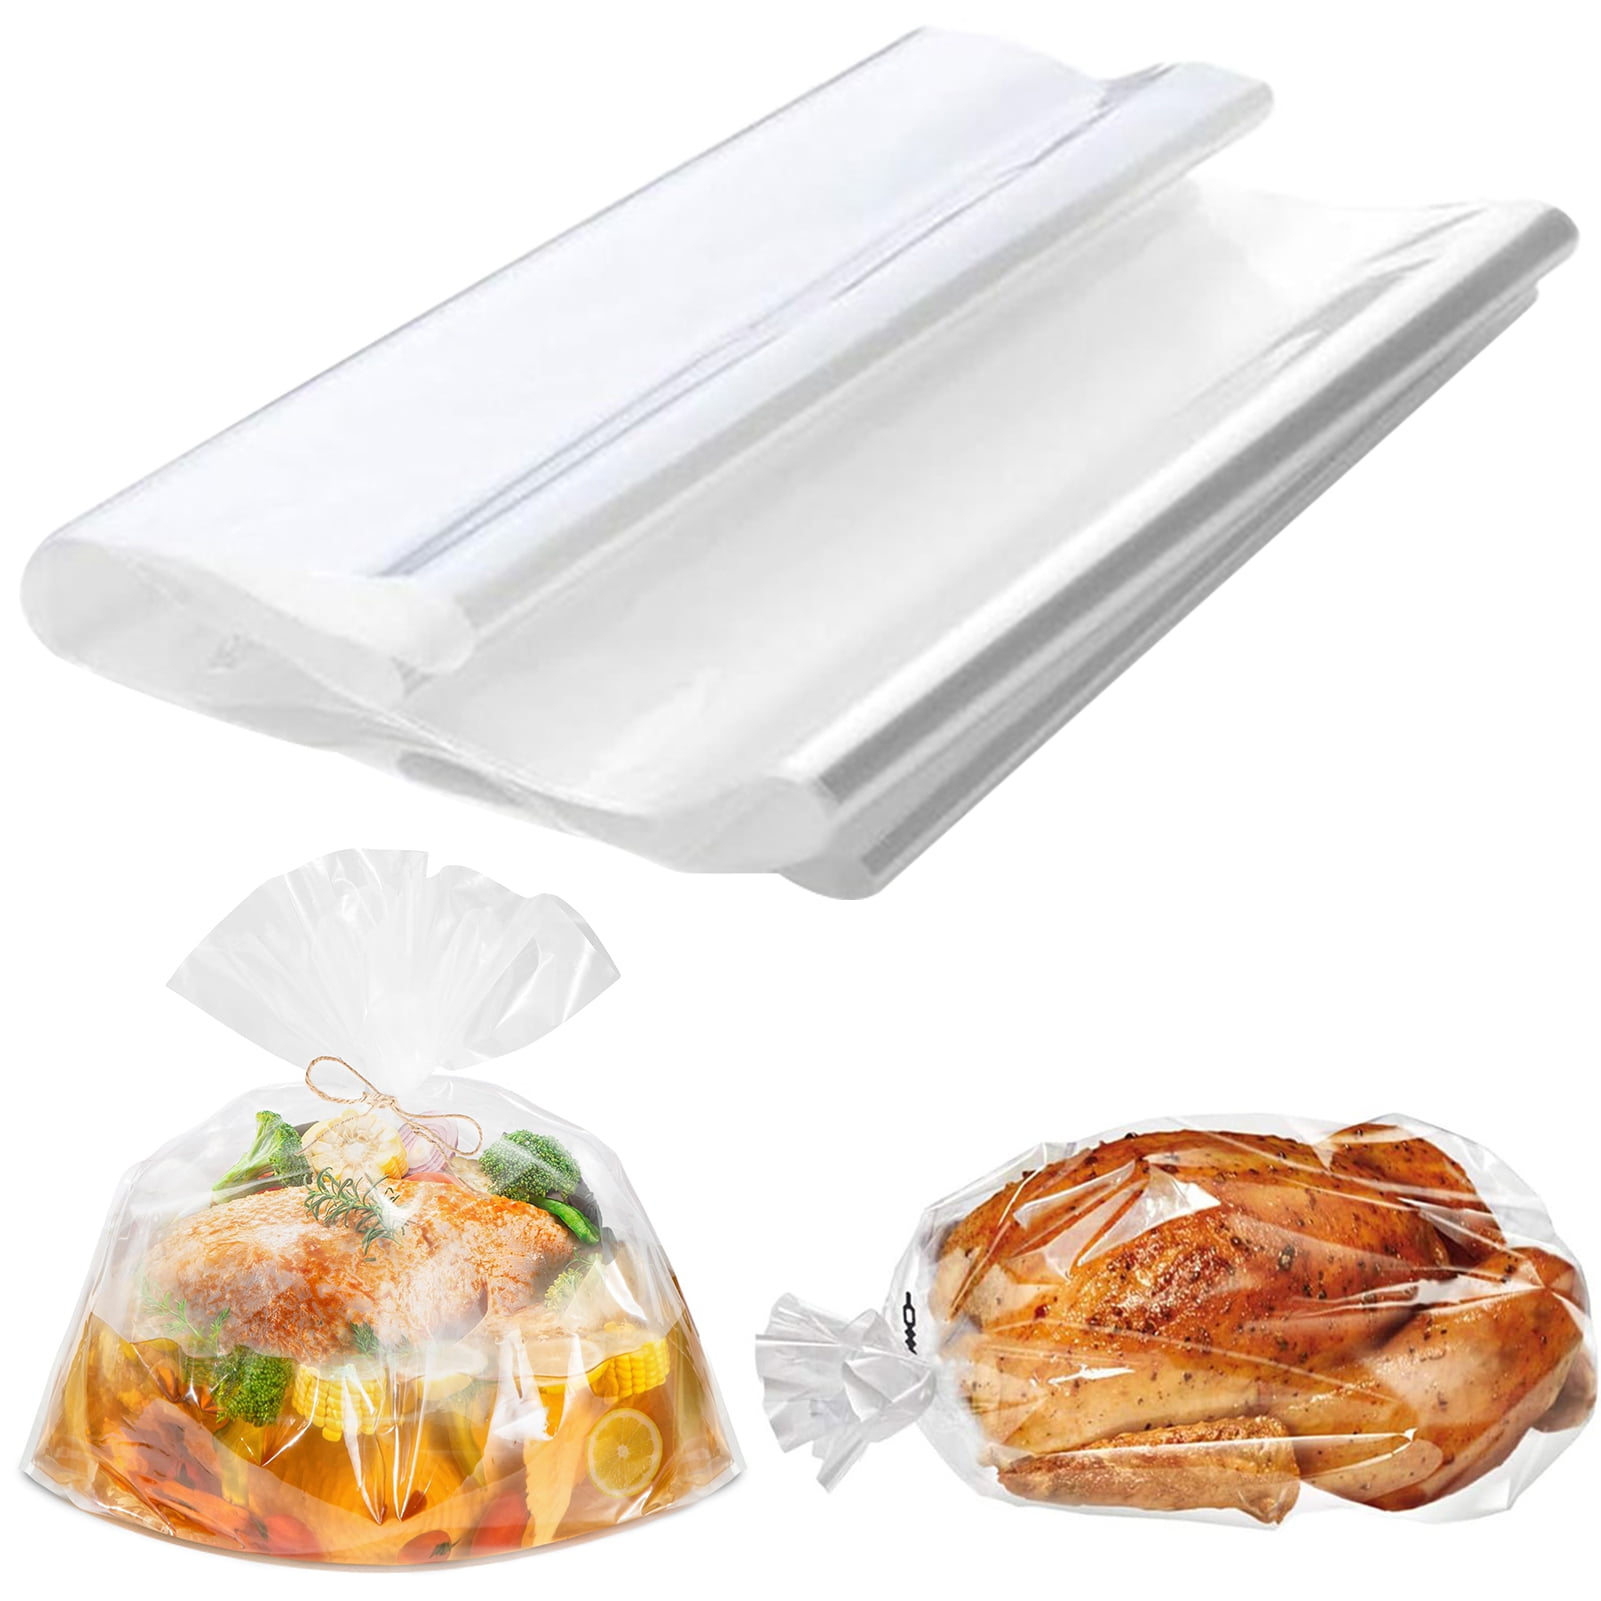 Ovenable Bags for High Temperature Cooking - Flavorseal